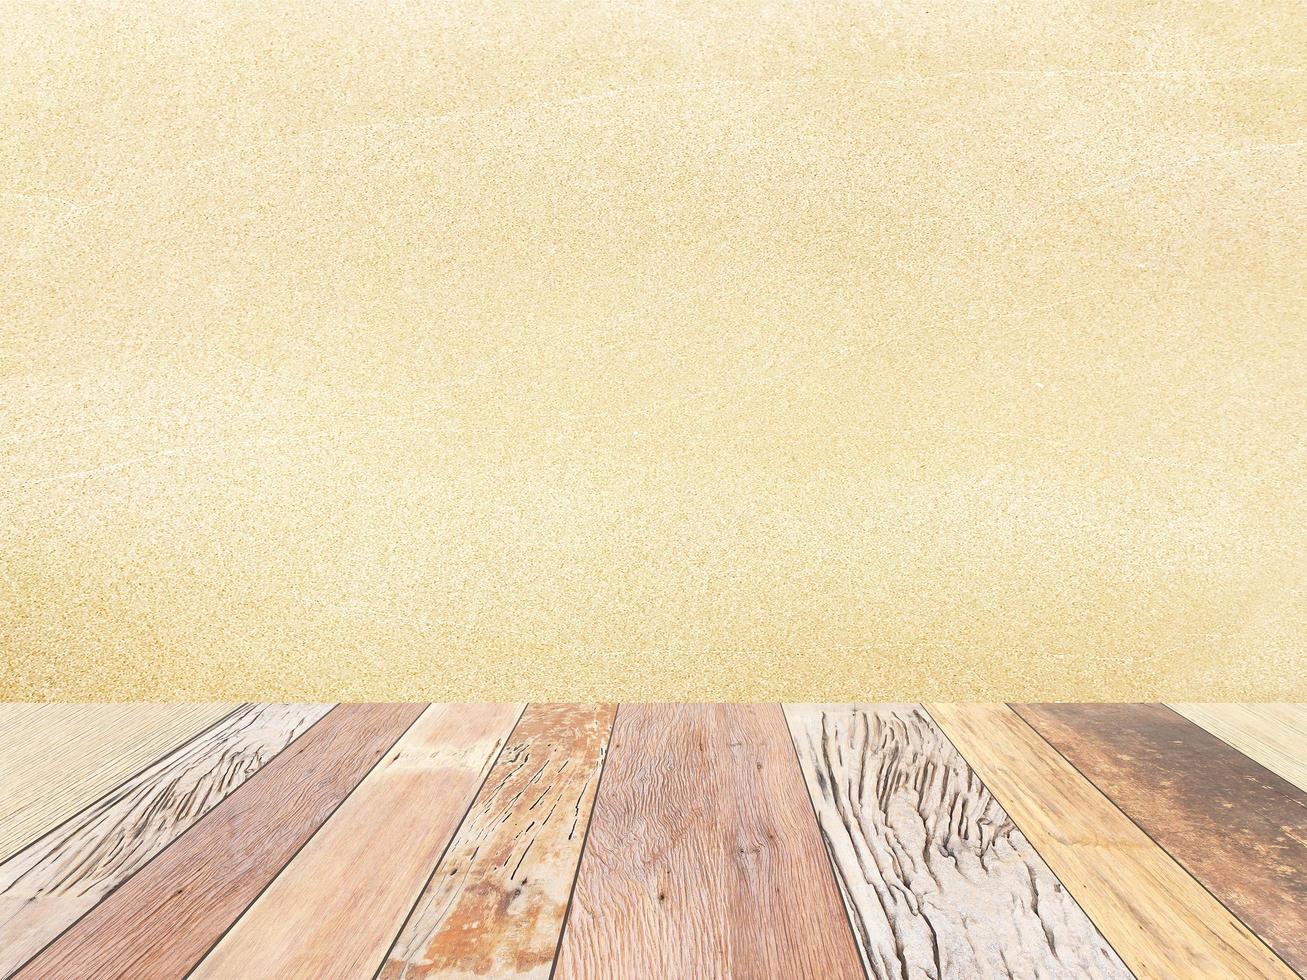 Wood table against beige background photo